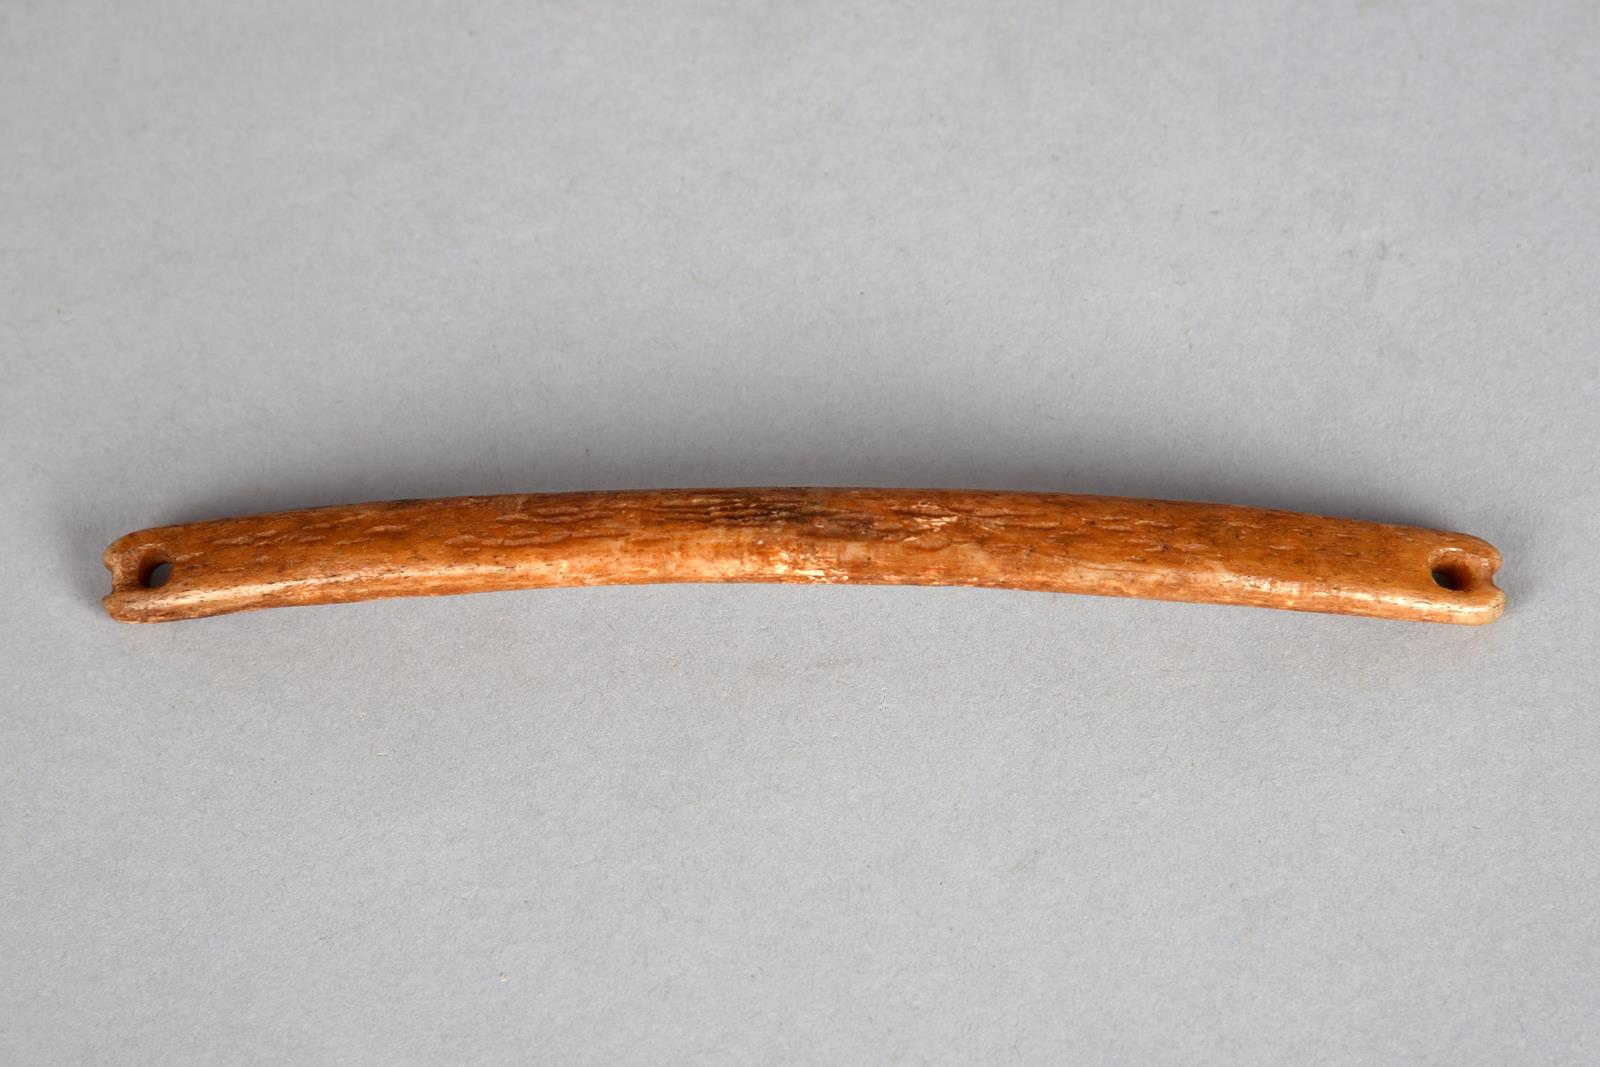 An Inuit handle bag handle Arctic, 19th century bone, curved with attachment holes and grooves to